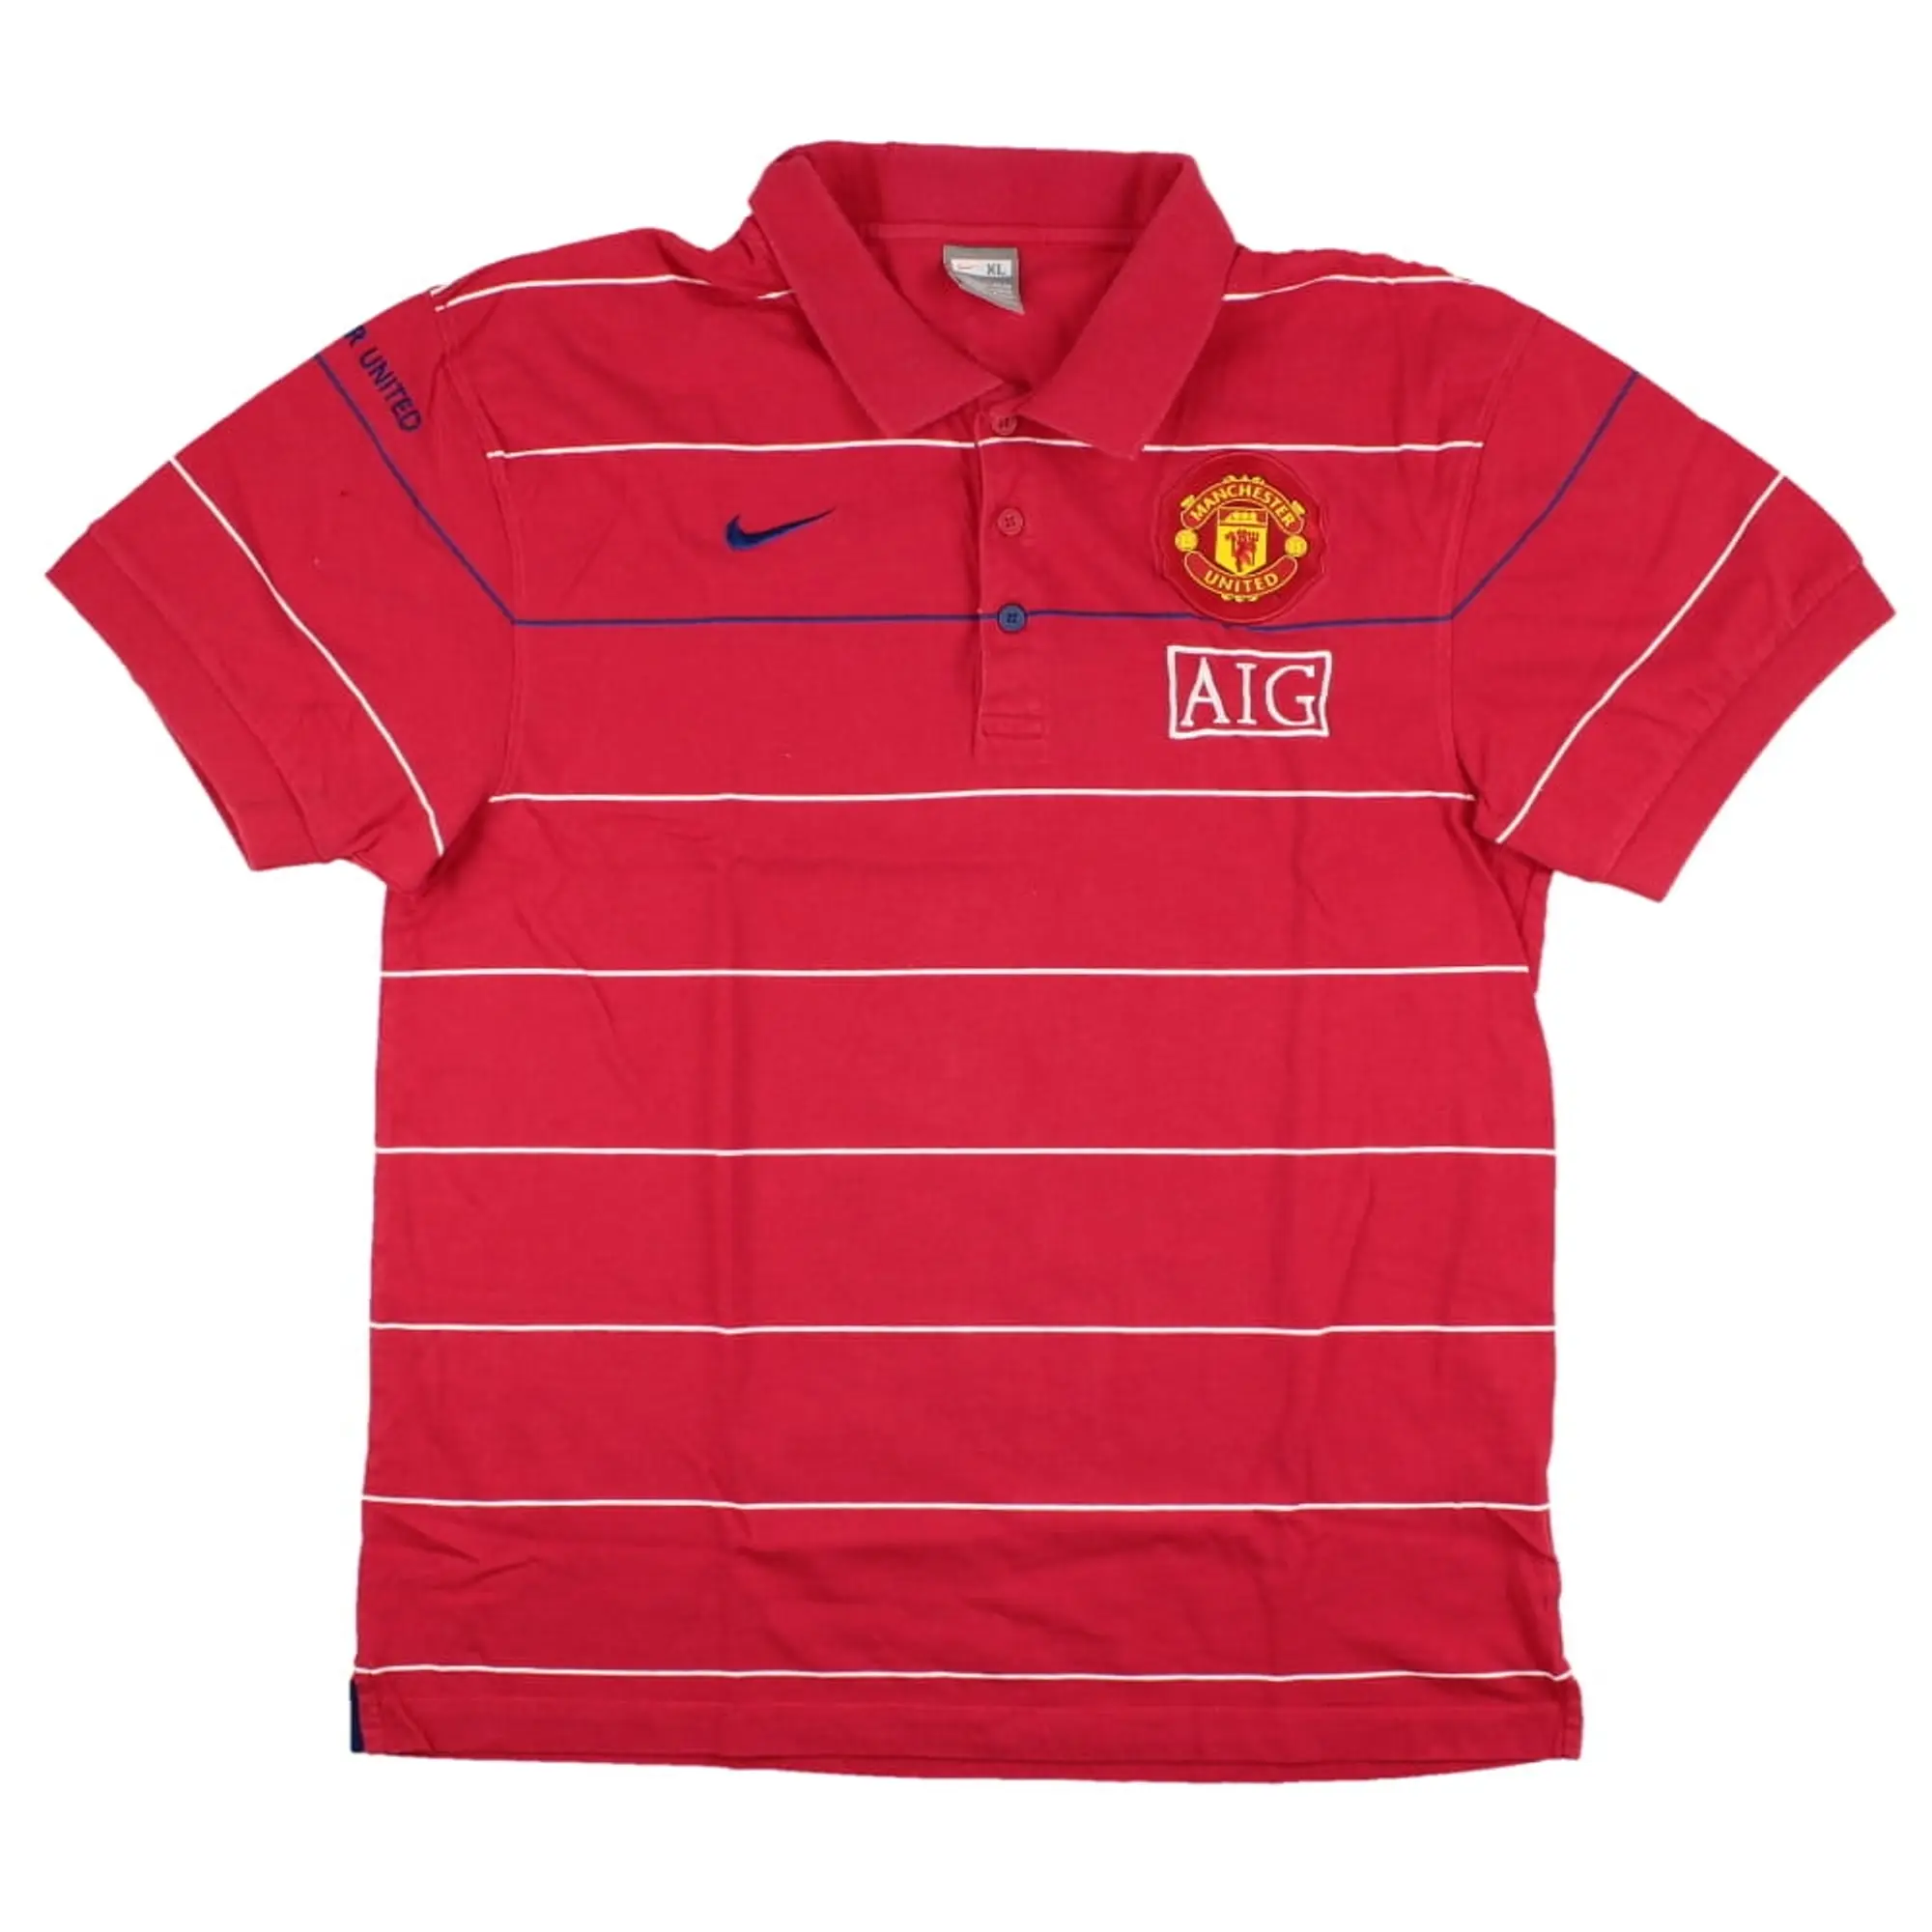 Nike Manchester United Mens SS Home Shirt 2008/09